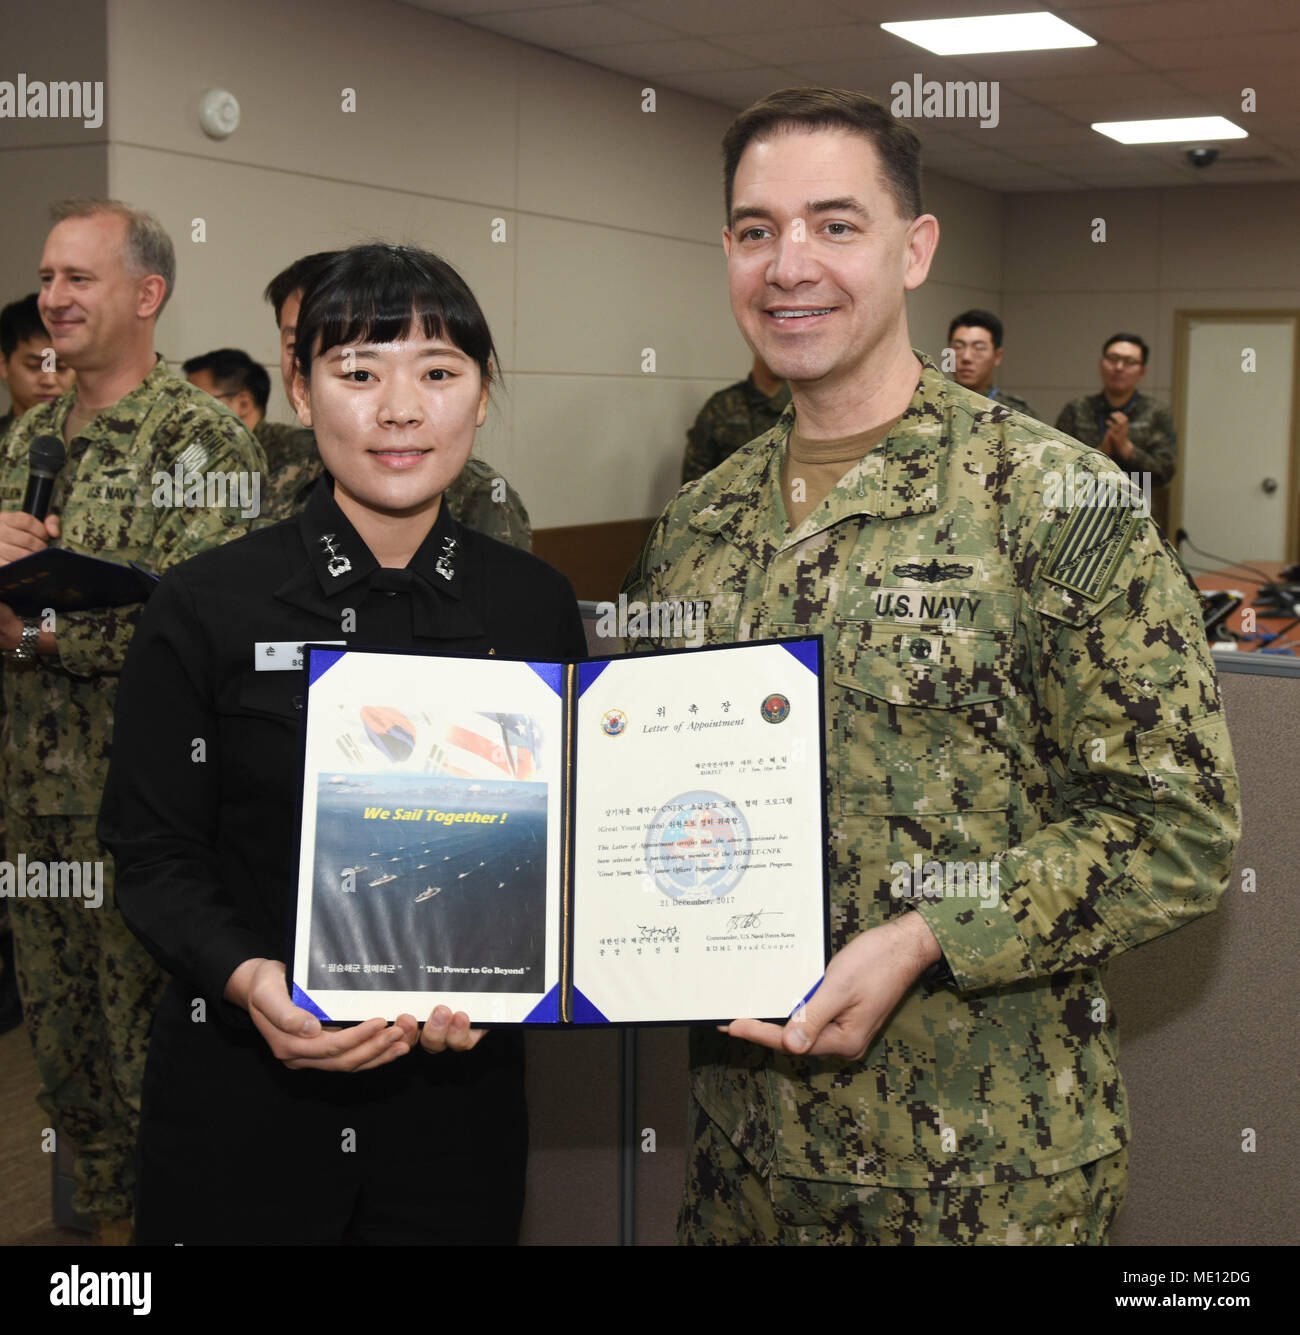 171221-N-TB148-056 BUSAN, Republic of Korea (Dec. 21, 2017) Rear Adm. Brad Cooper, commander, U.S. Naval Forces Korea (CNFK), presents Lt. Son, Hye Rim with a letter of appointment for her selection to the 'Great Young Minds' Junior Officers' Engagement and Cooperation Program. The 'Great Young Minds' initiative brings together hand-selected, young officers from the ROK and U.S. navies and challenges them to develop innovative solutions to further enhance the ROK -U.S. alliance of the future. (U.S. Navy photo by Mass Communication Specialist Seaman William Carlisle) Stock Photo